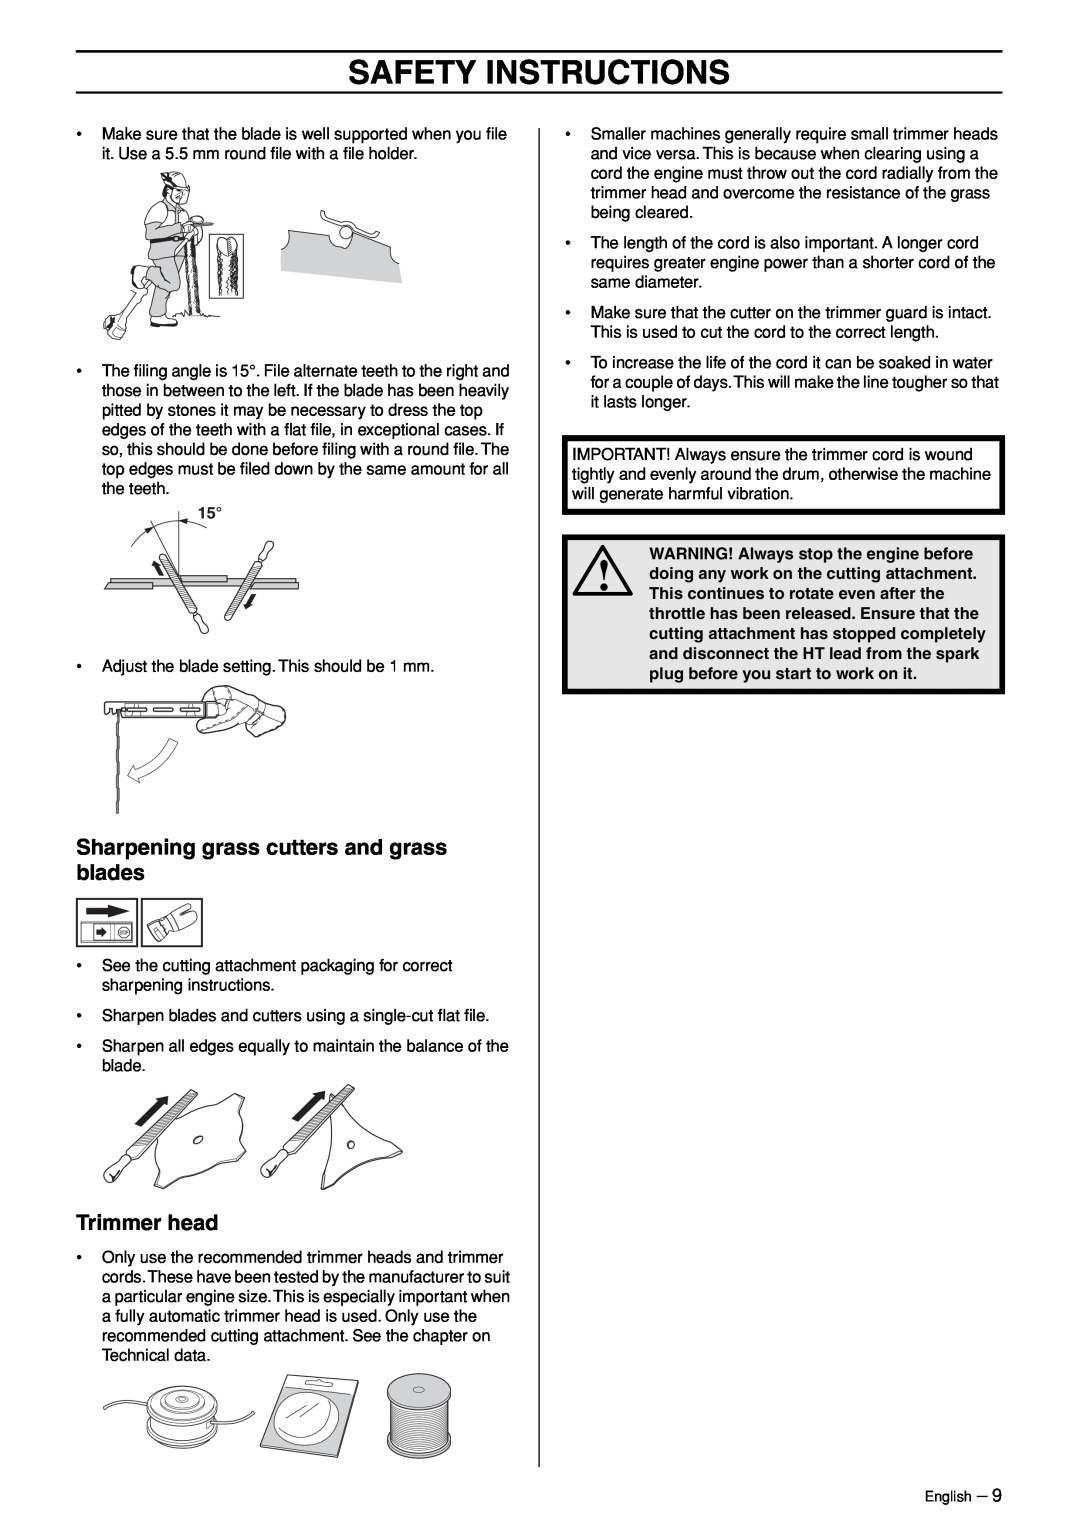 Husqvarna 324RX-Series manual Safety Instructions, Sharpening grass cutters and grass blades, Trimmer head 